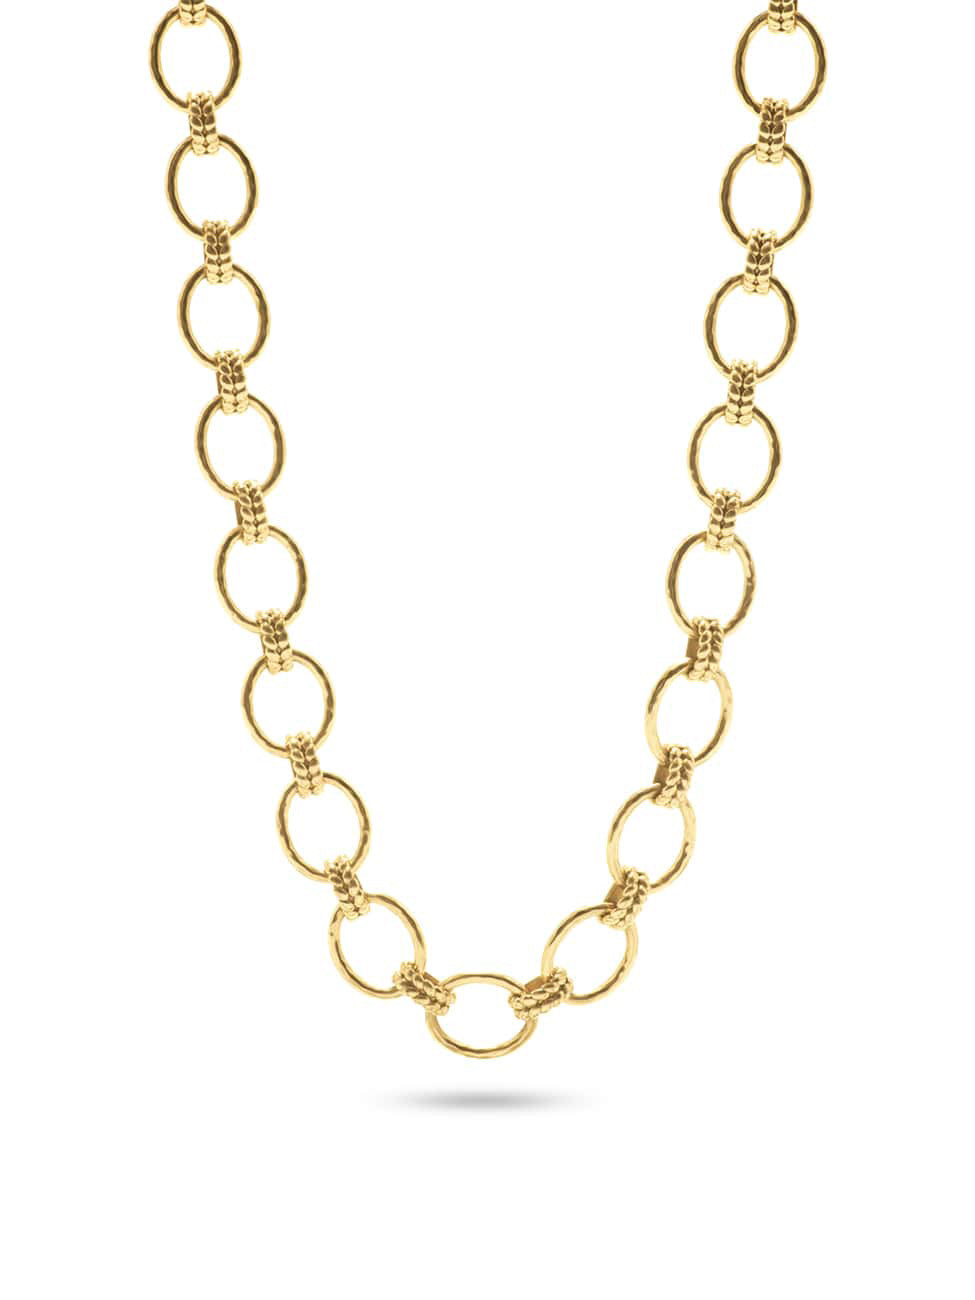 capucine de wulf cleopatra grande link necklace in gold-detail view